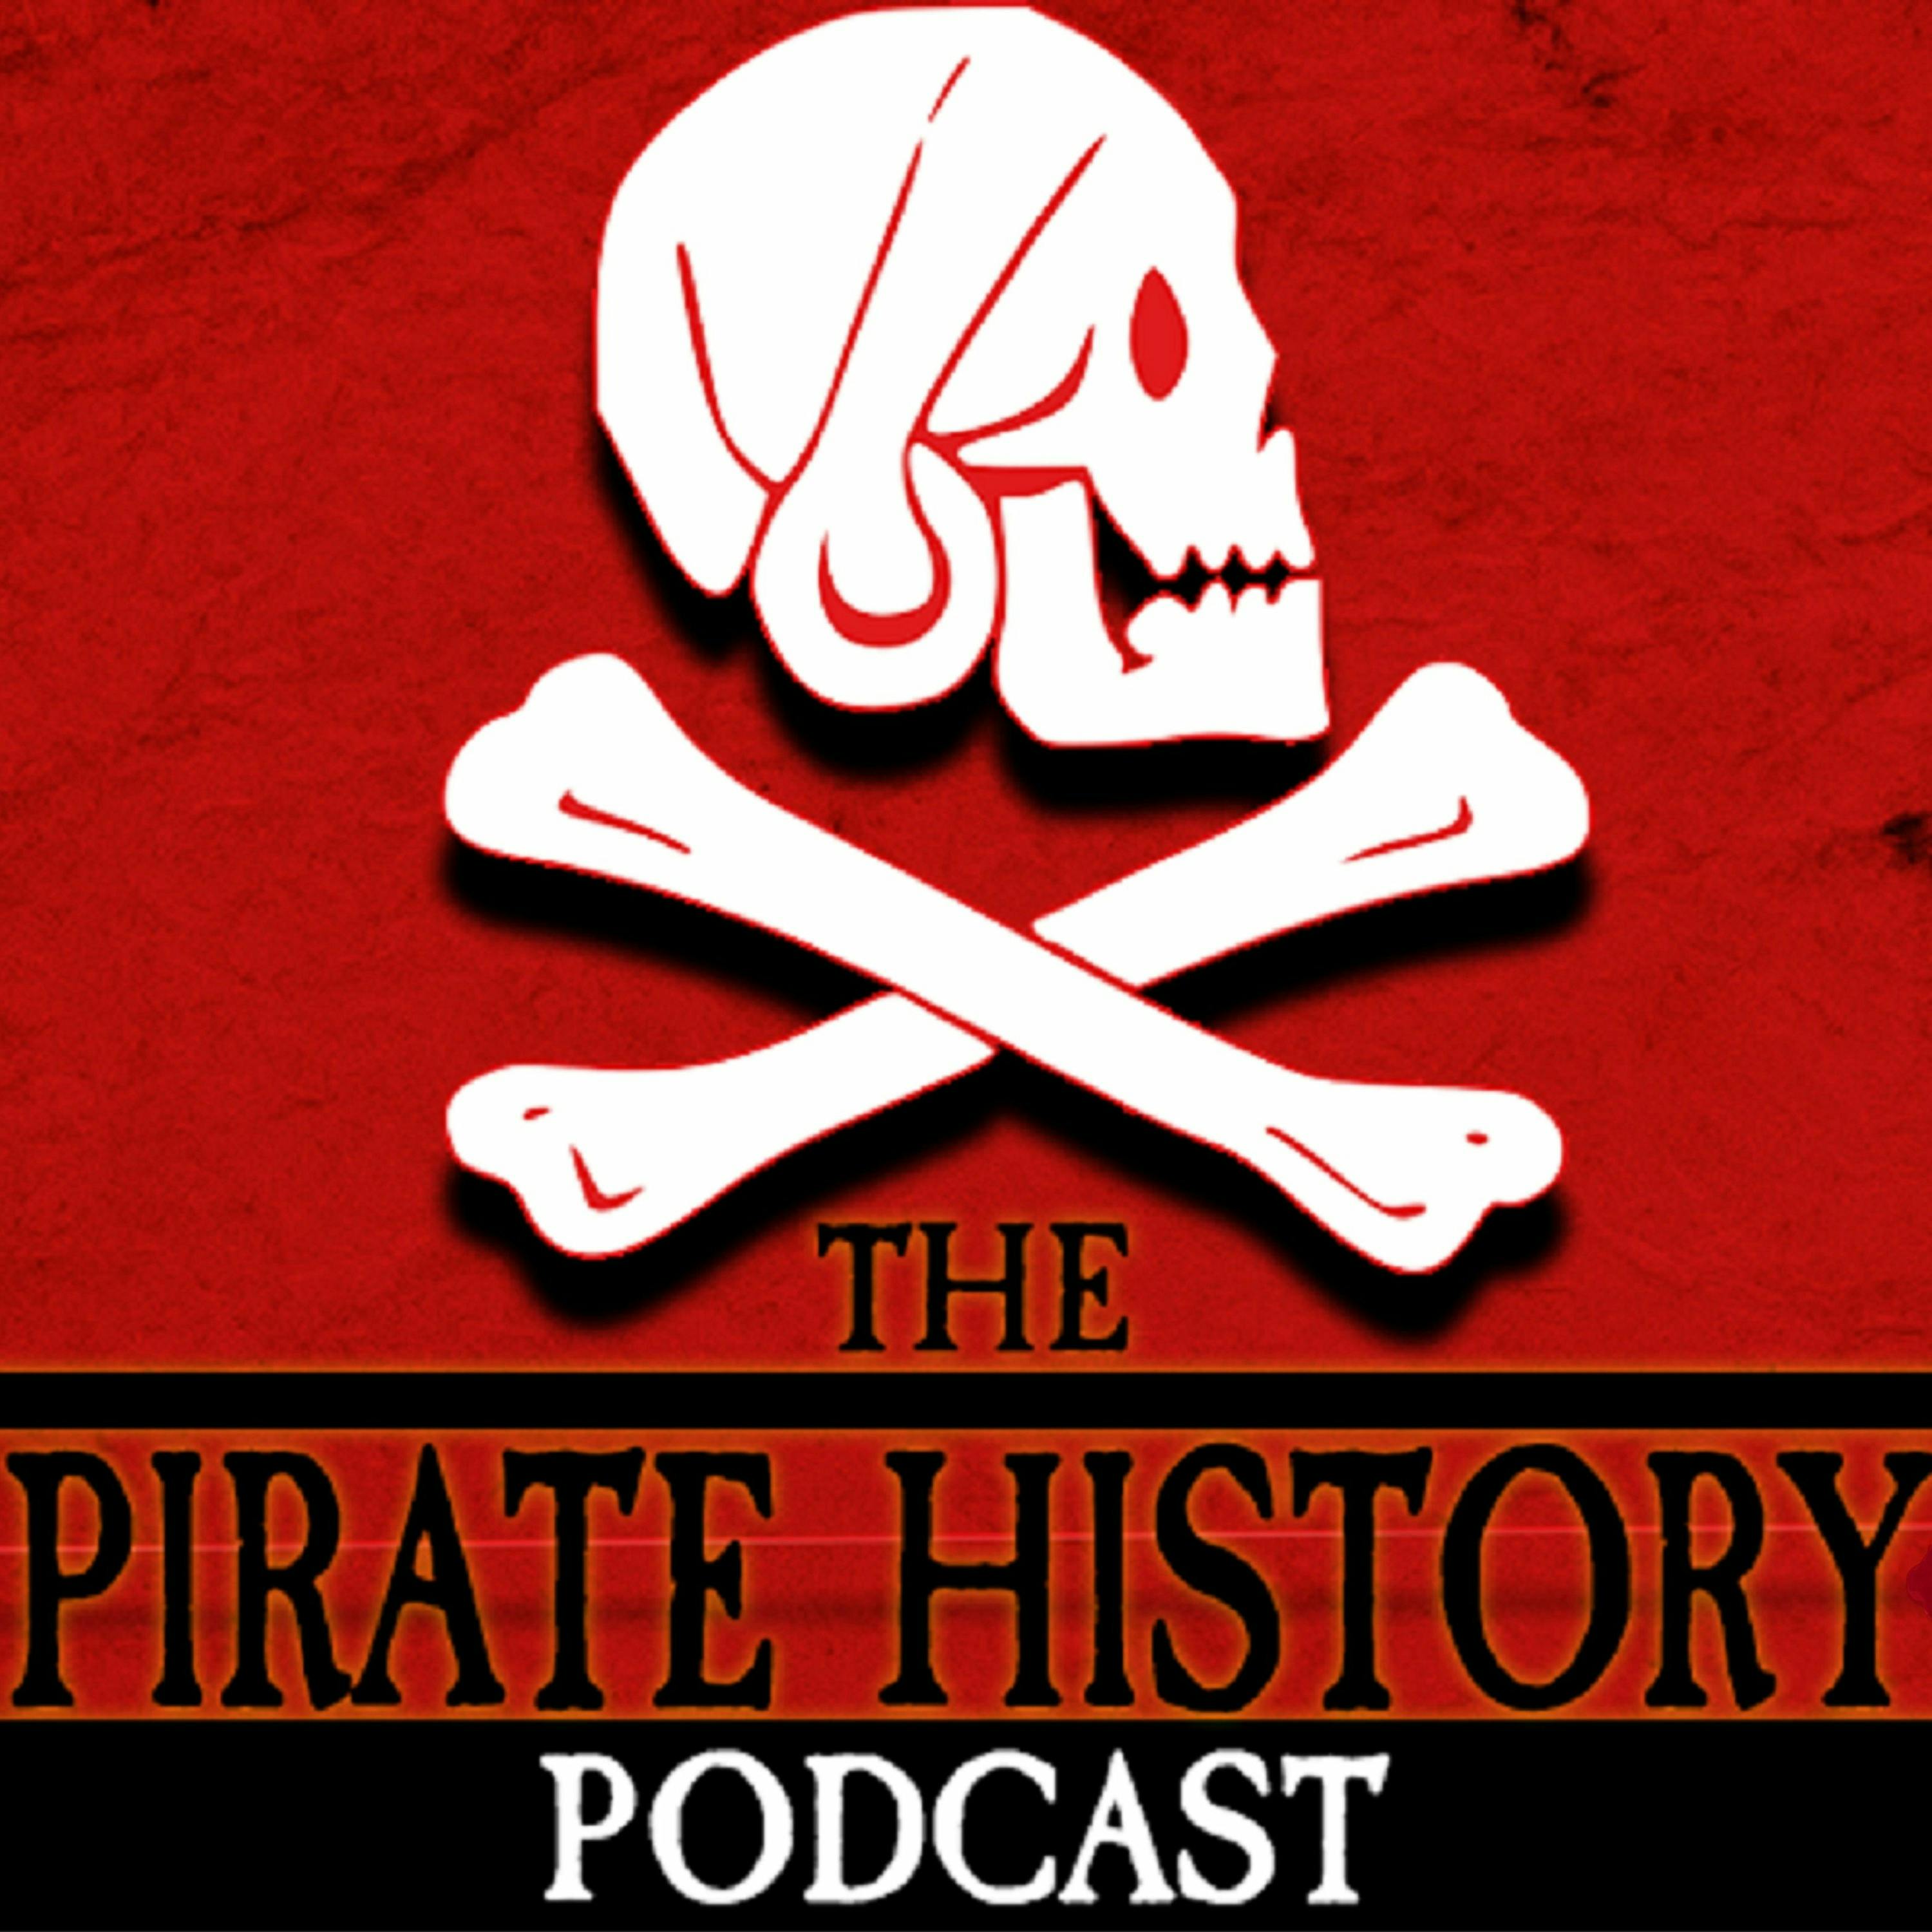 Episode 227 - Pirates, Free-Booters, & Sea Rovers